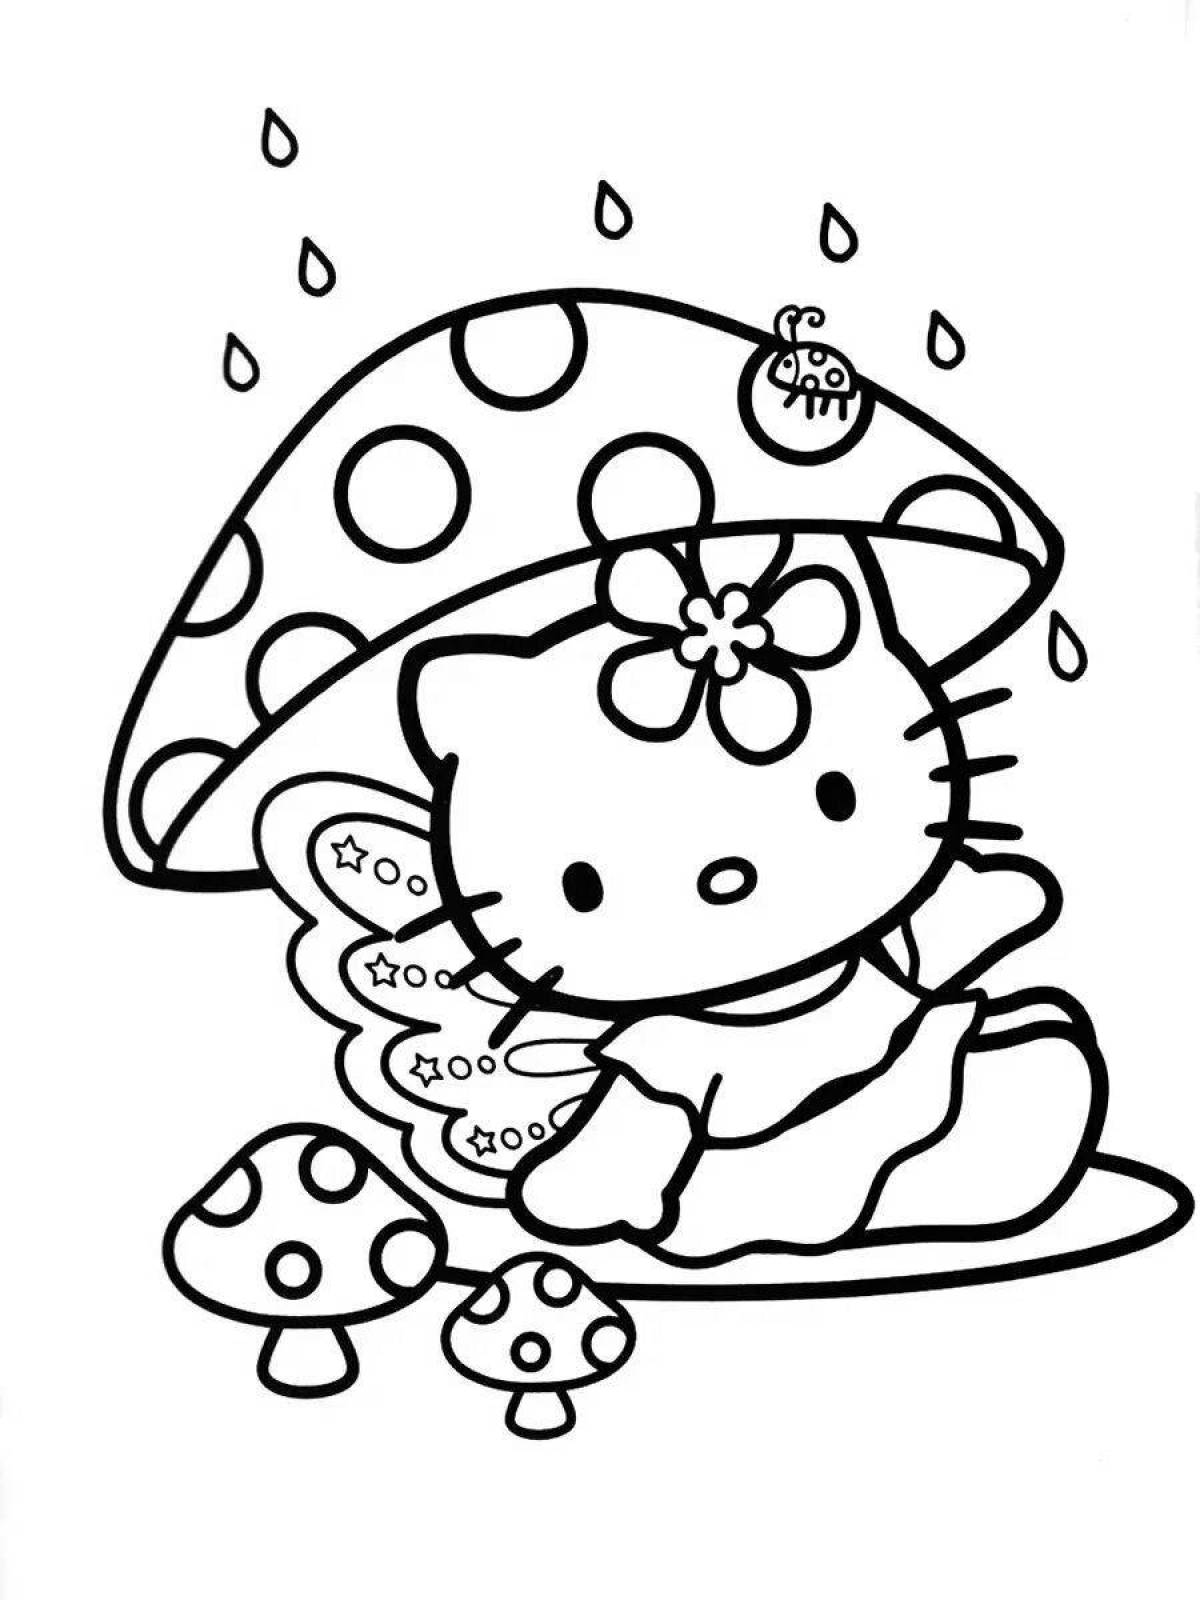 Humorous chicks and hello kitty coloring book